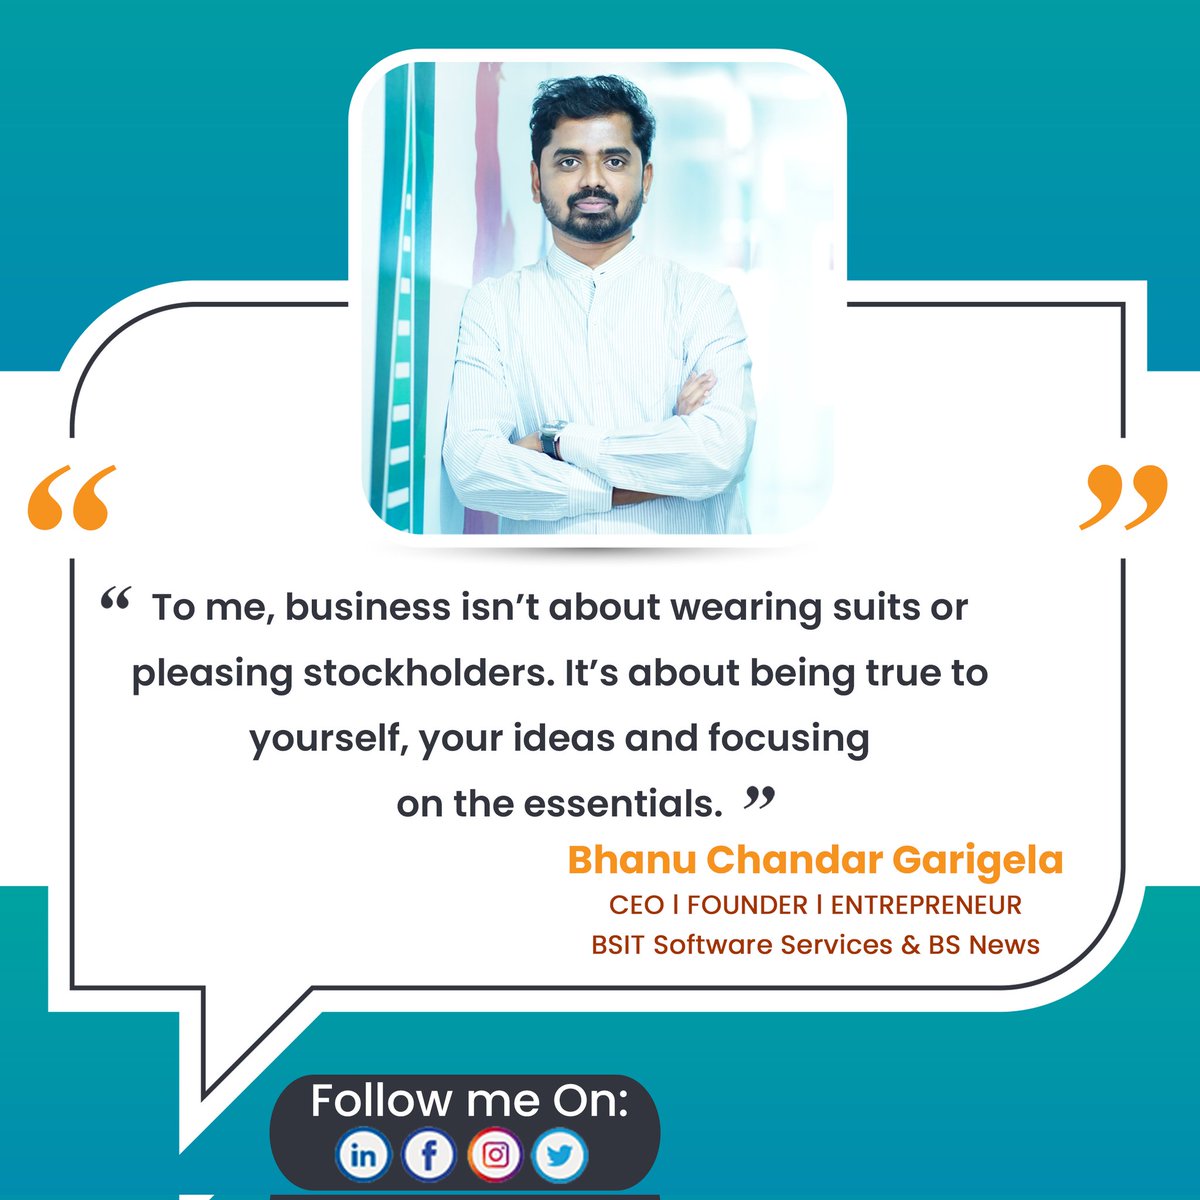 It’s about being true to yourself, your ideas.”
 #bsitsoftware #bsit #bsitsoftwareservices #BSITSoftware  #BSIT #India #Qoute #Motivational #Motivation #MotivationalQuotes #Quotes #Inspiration #Success #InspirationalQuotes #Mindset #Positivity #Goals #Inspirational #Entrepreneur